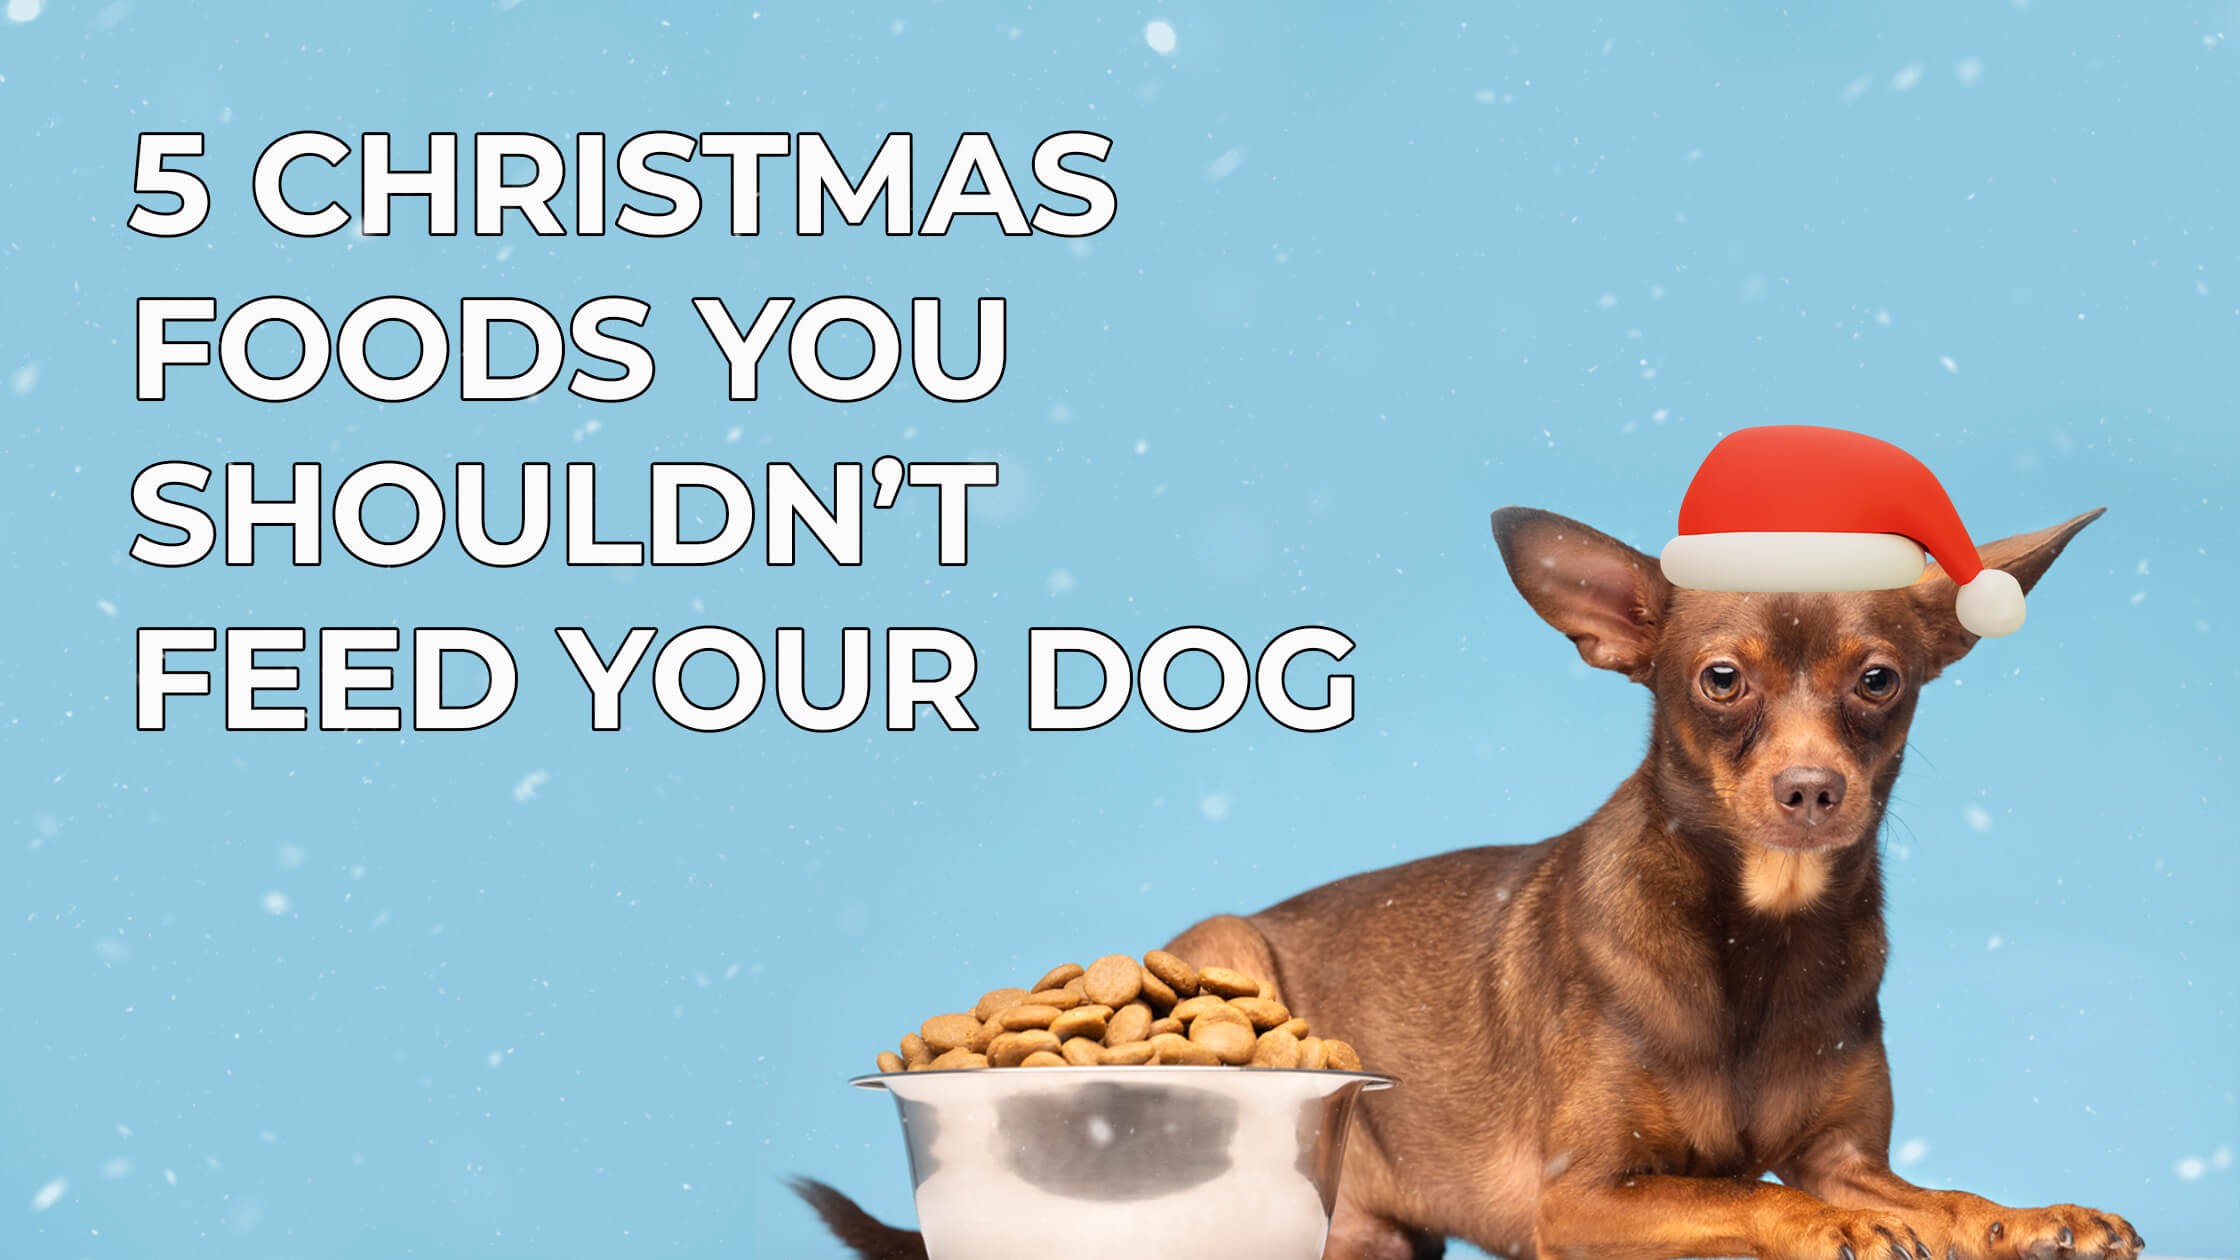 5 Christmas Foods You Shouldn’t Feed Your Dog